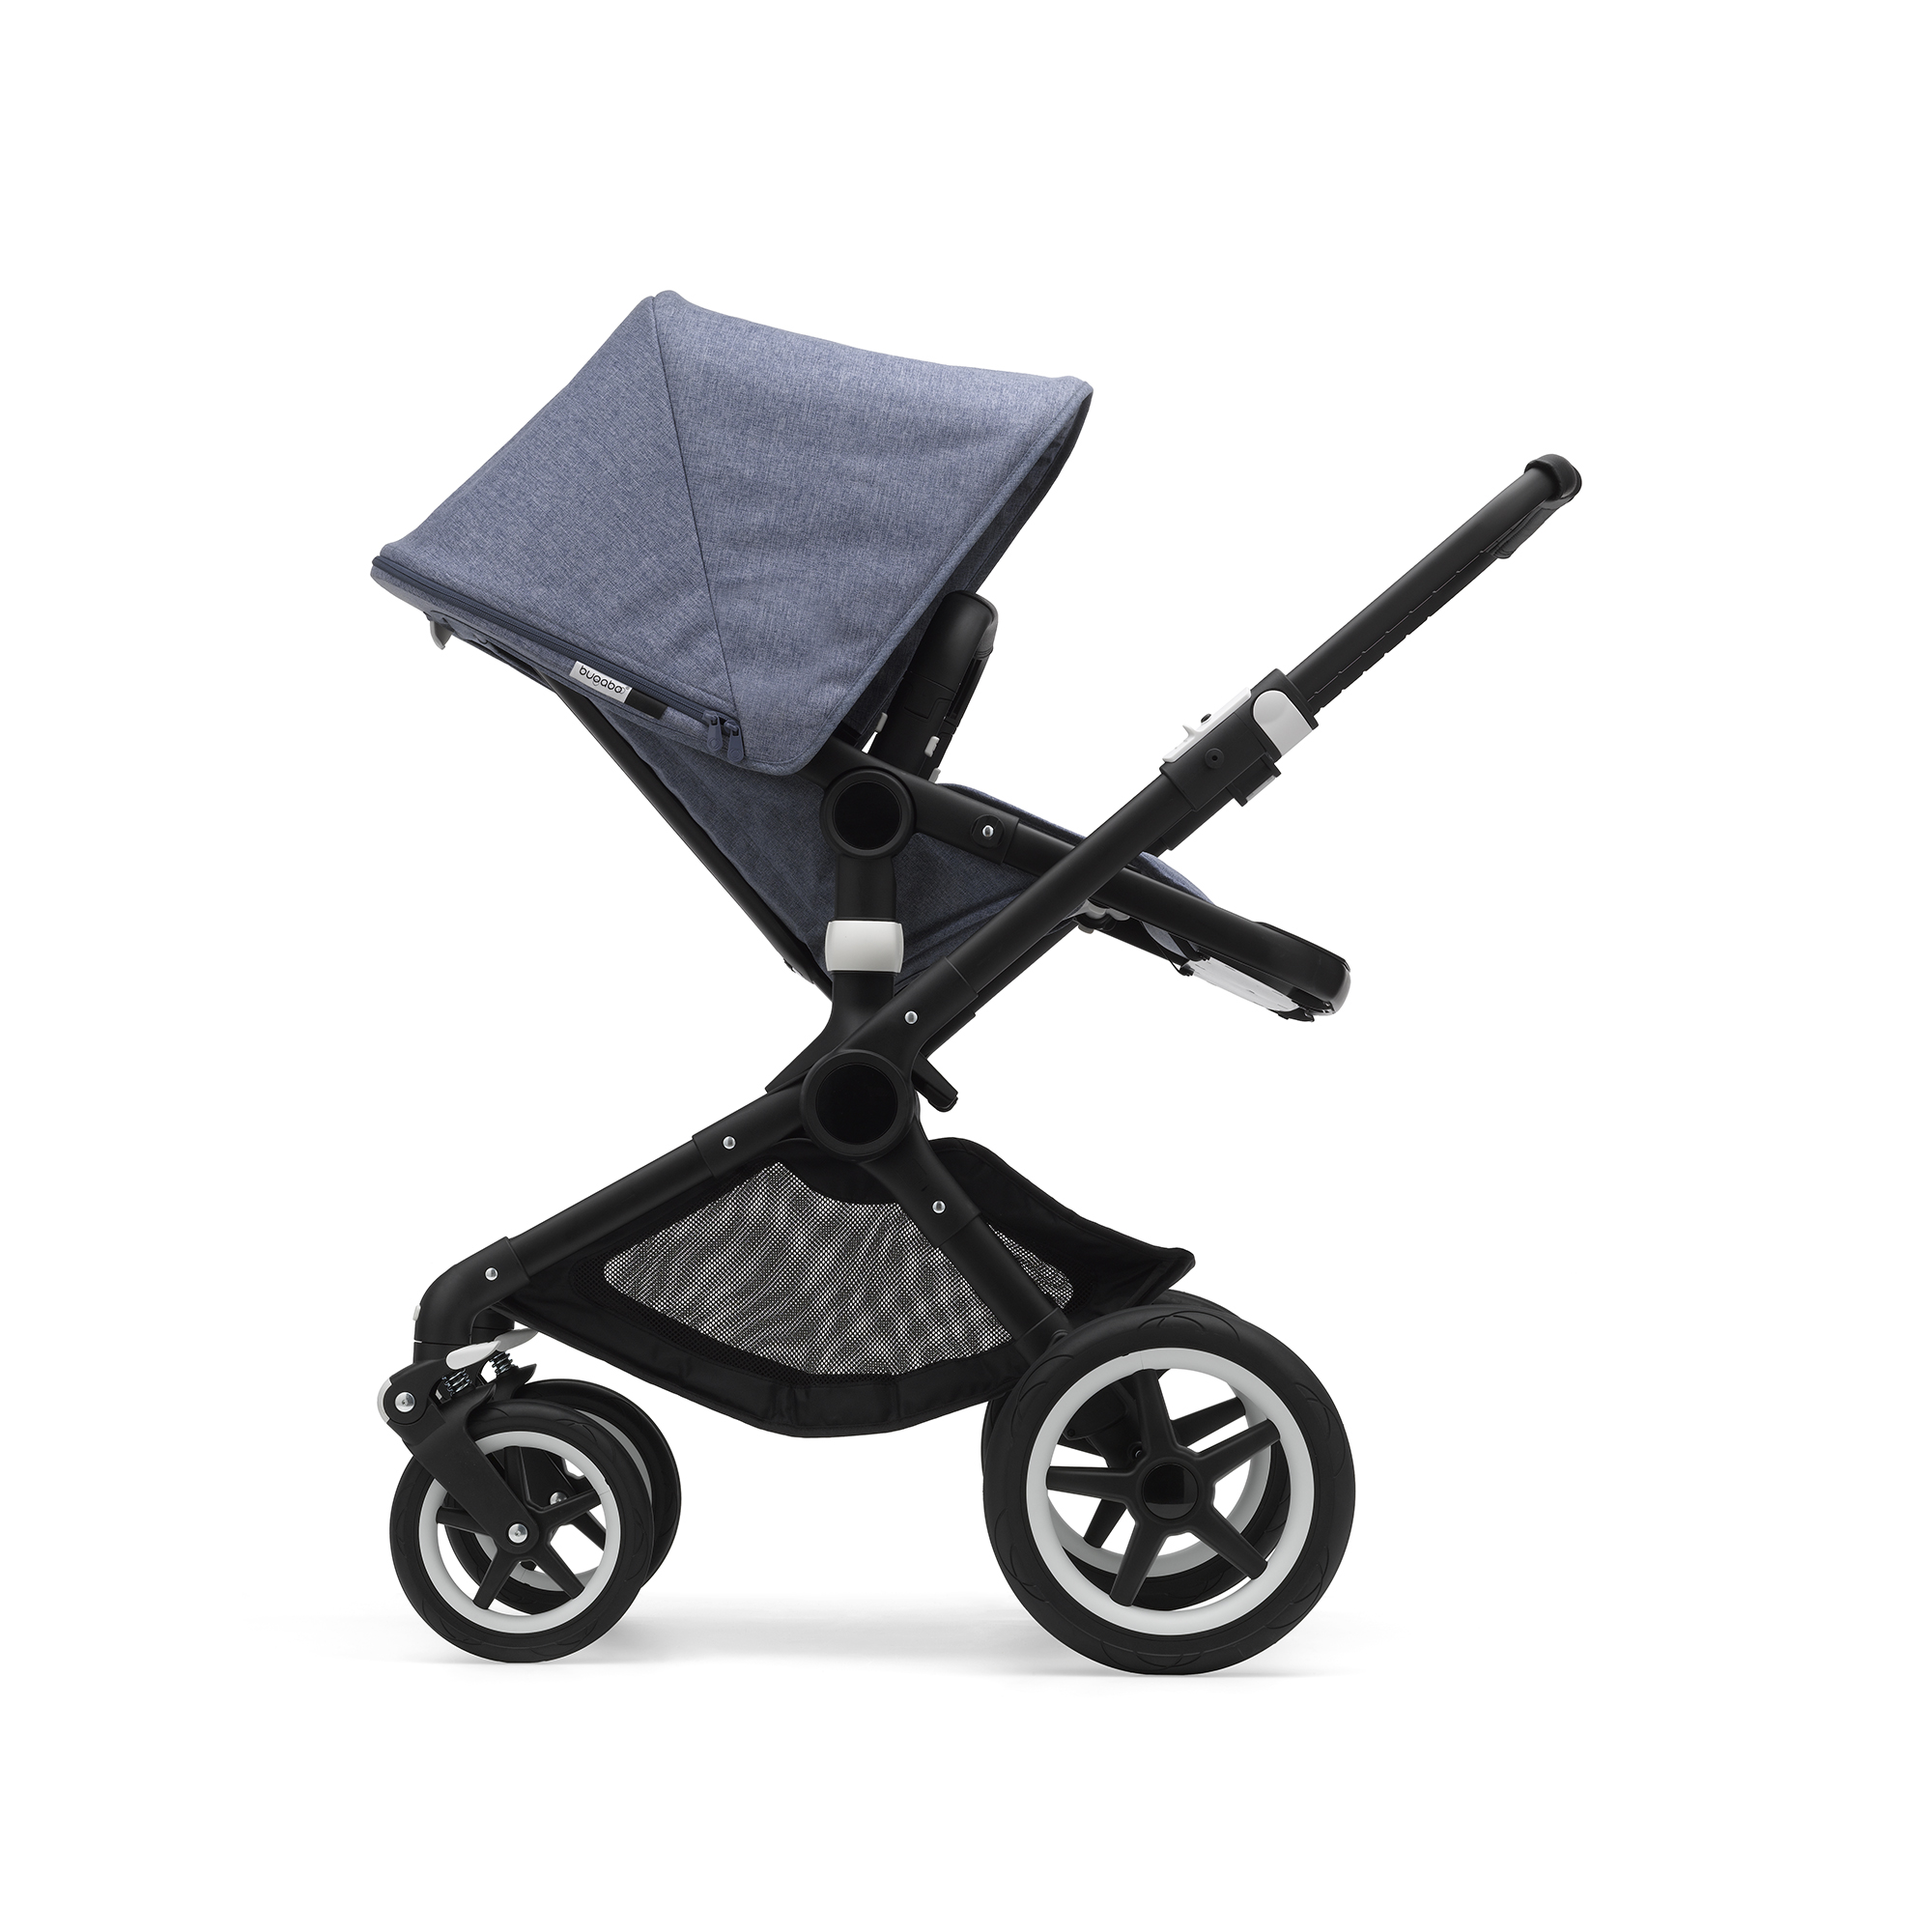 which bugaboo stroller is the best